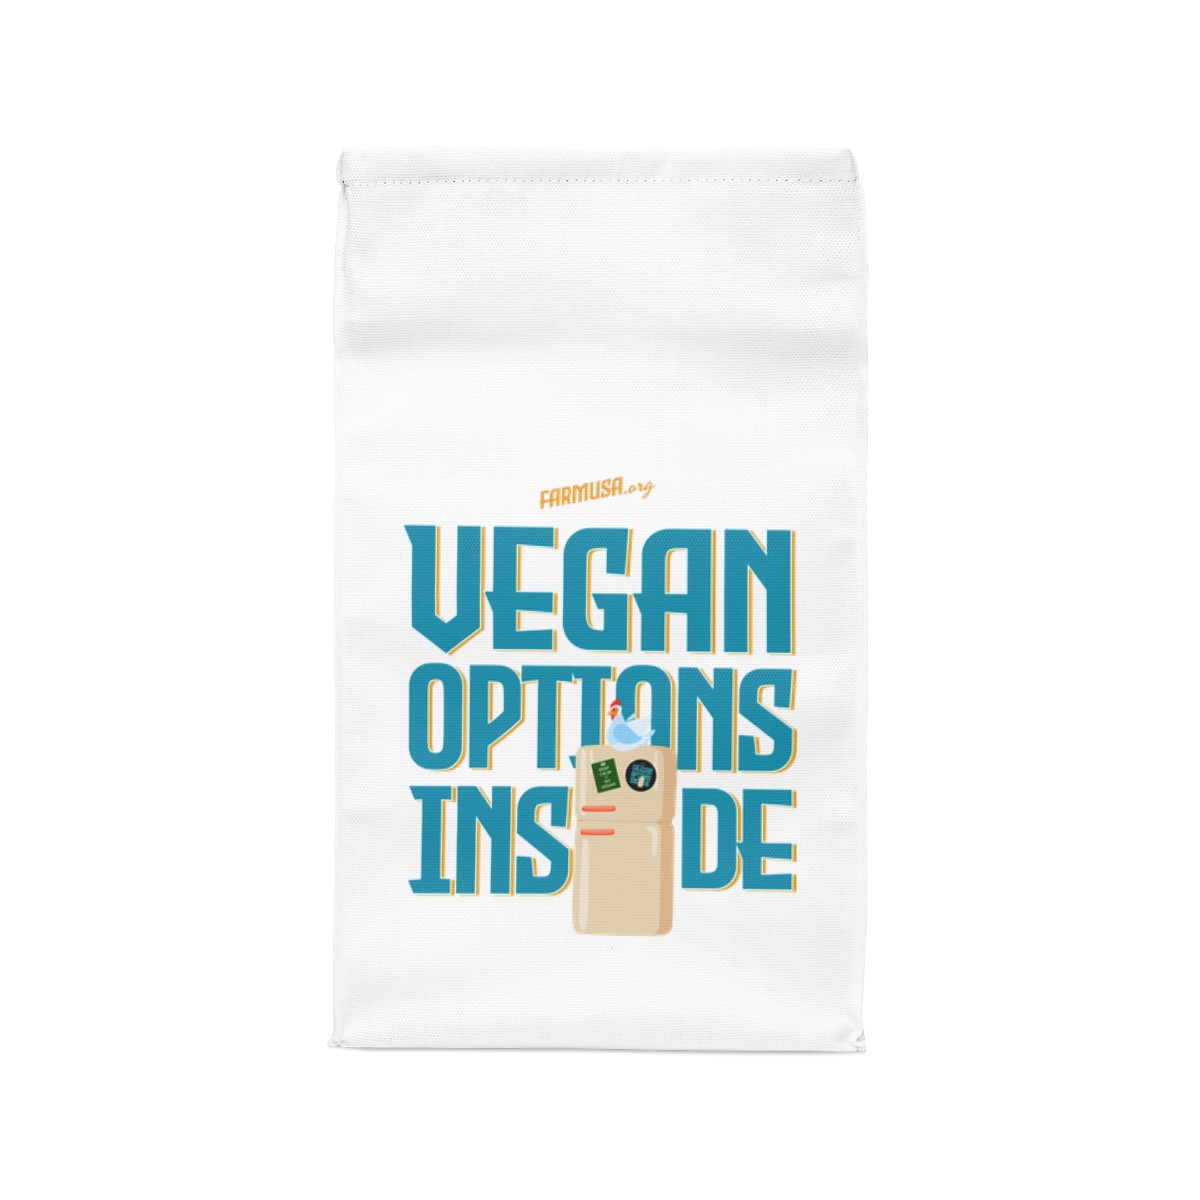 Vegan Options Polyester Lunch Bag product thumbnail image